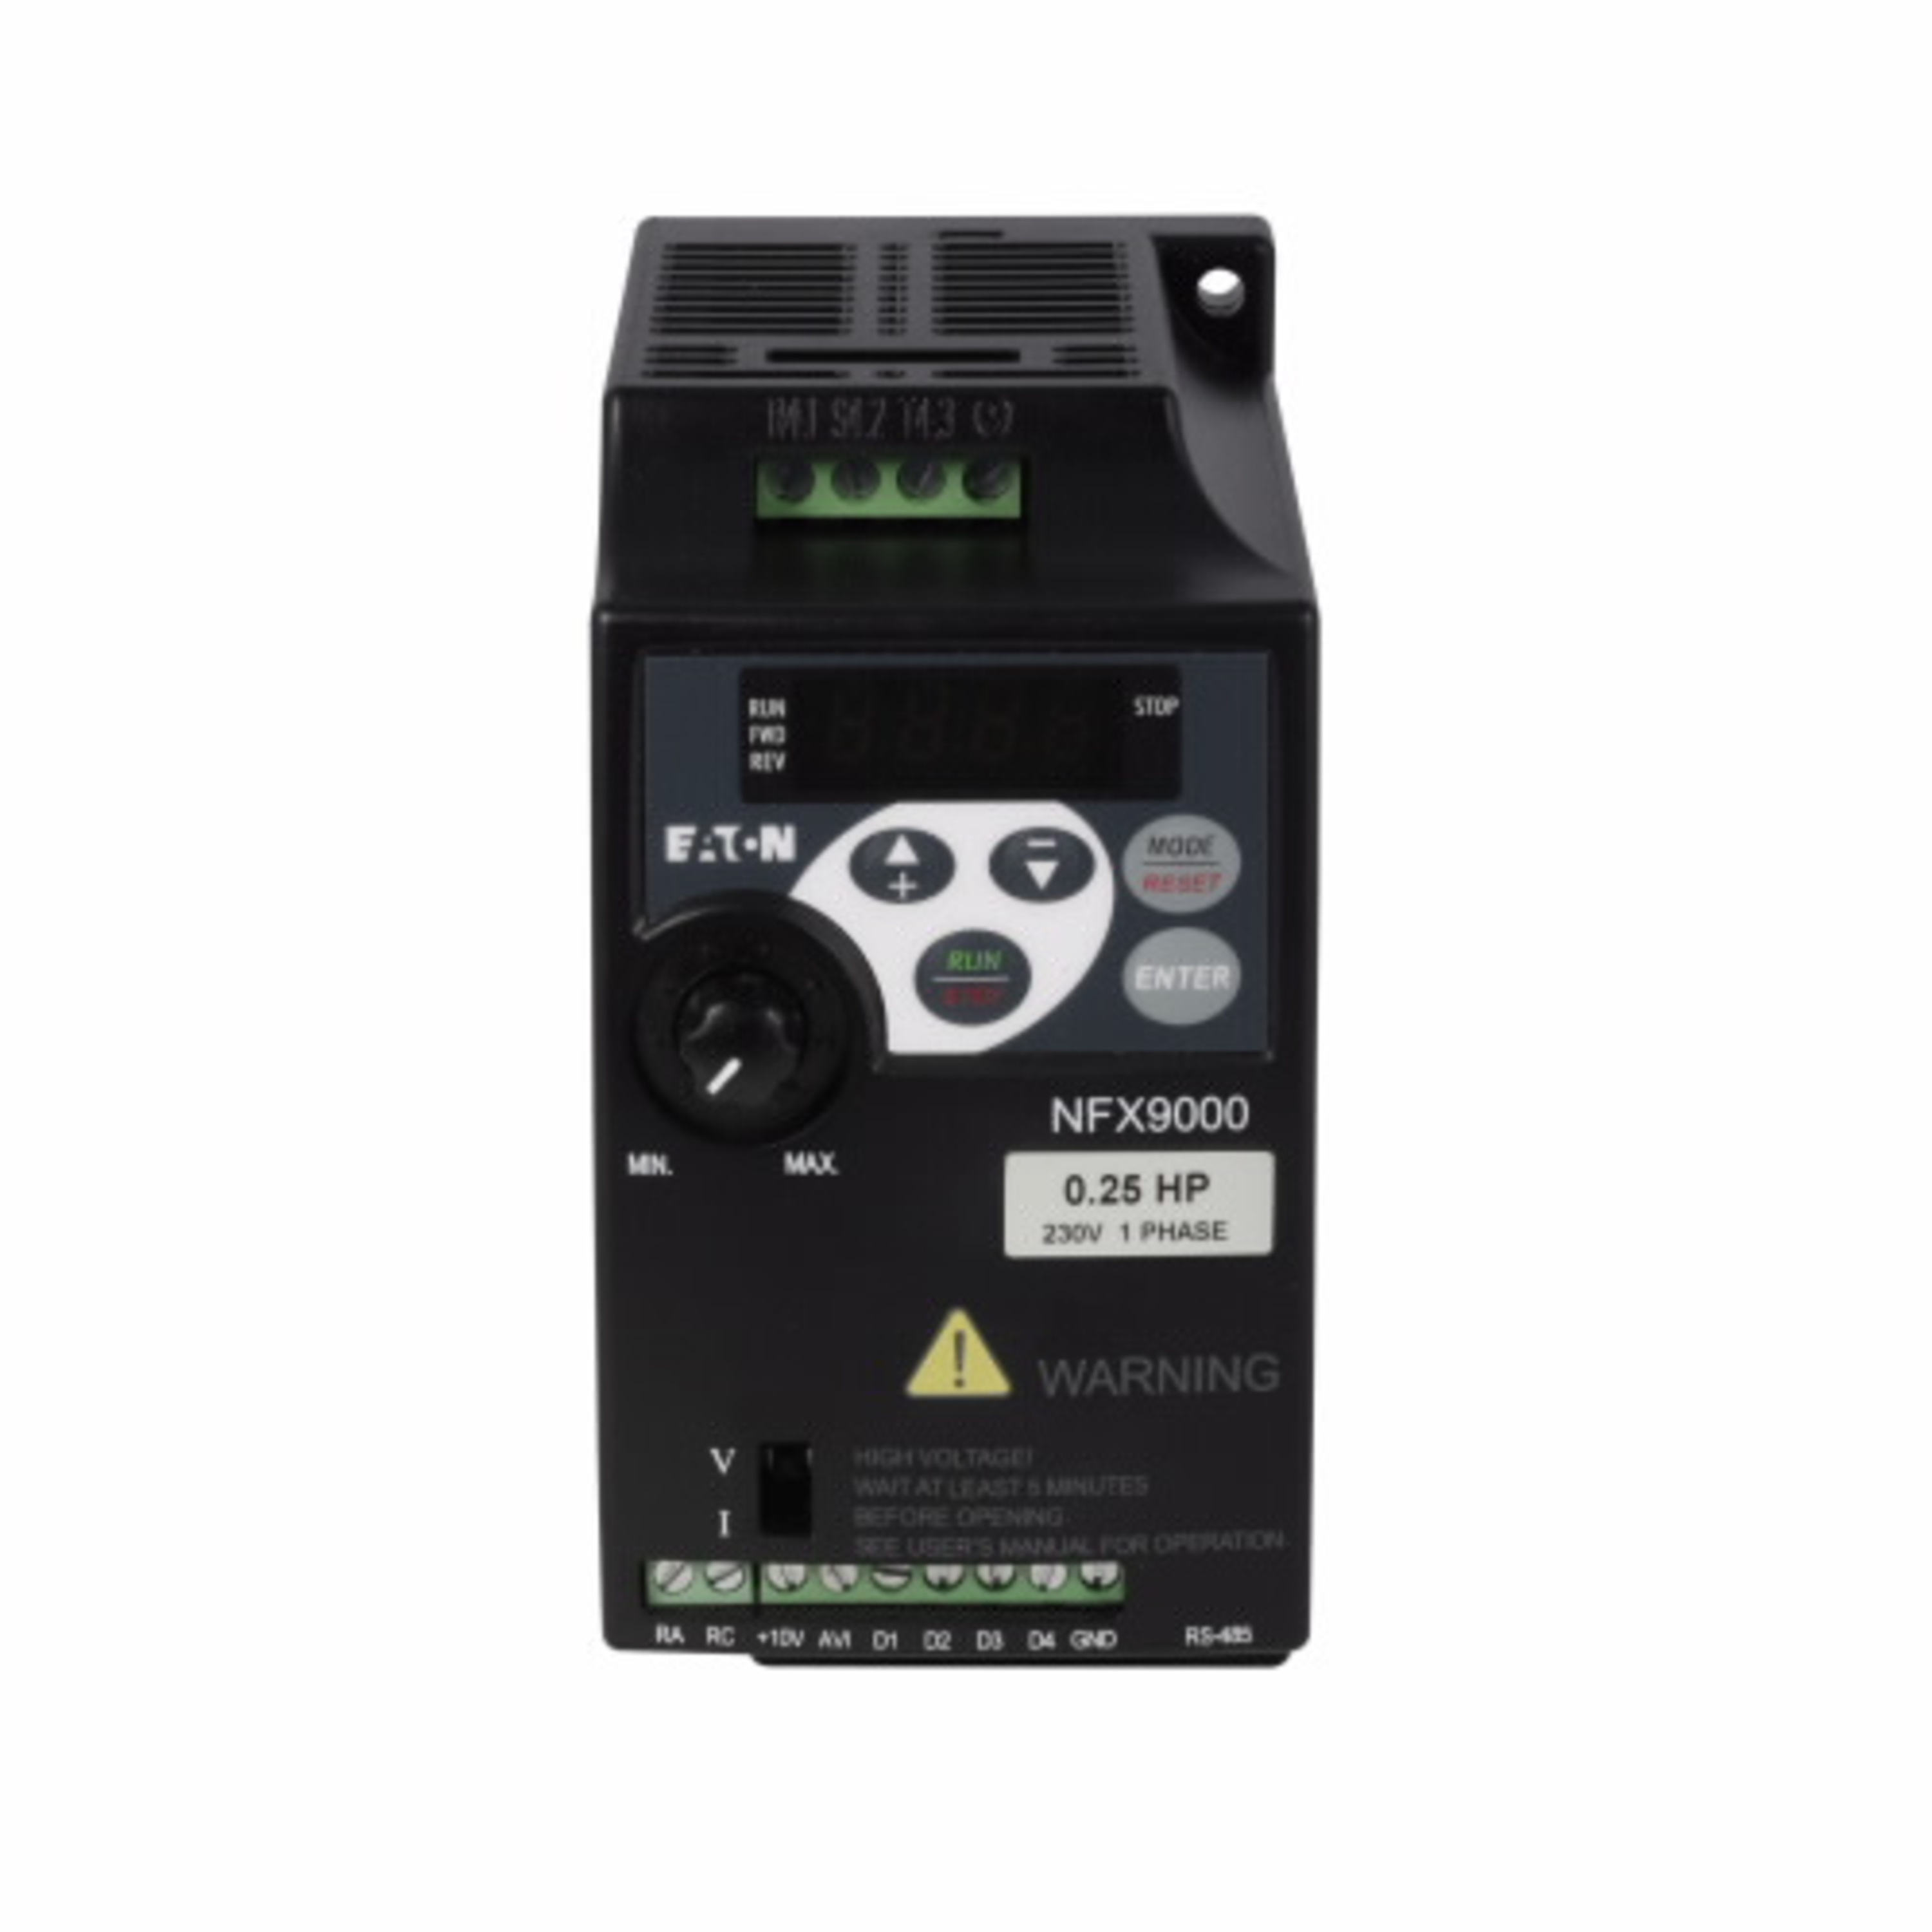 Eaton NFXF25A0-2 Eaton | Cutler Hammer NFXF25A0-2  Variable Frequency Drives AC Drives – 480VAC – Component https://gesrepair.com/wp-content/uploads/2022/Eaton/Images/Eaton_NFXF25A0-2_Variable_Frequency_Drive.jpg